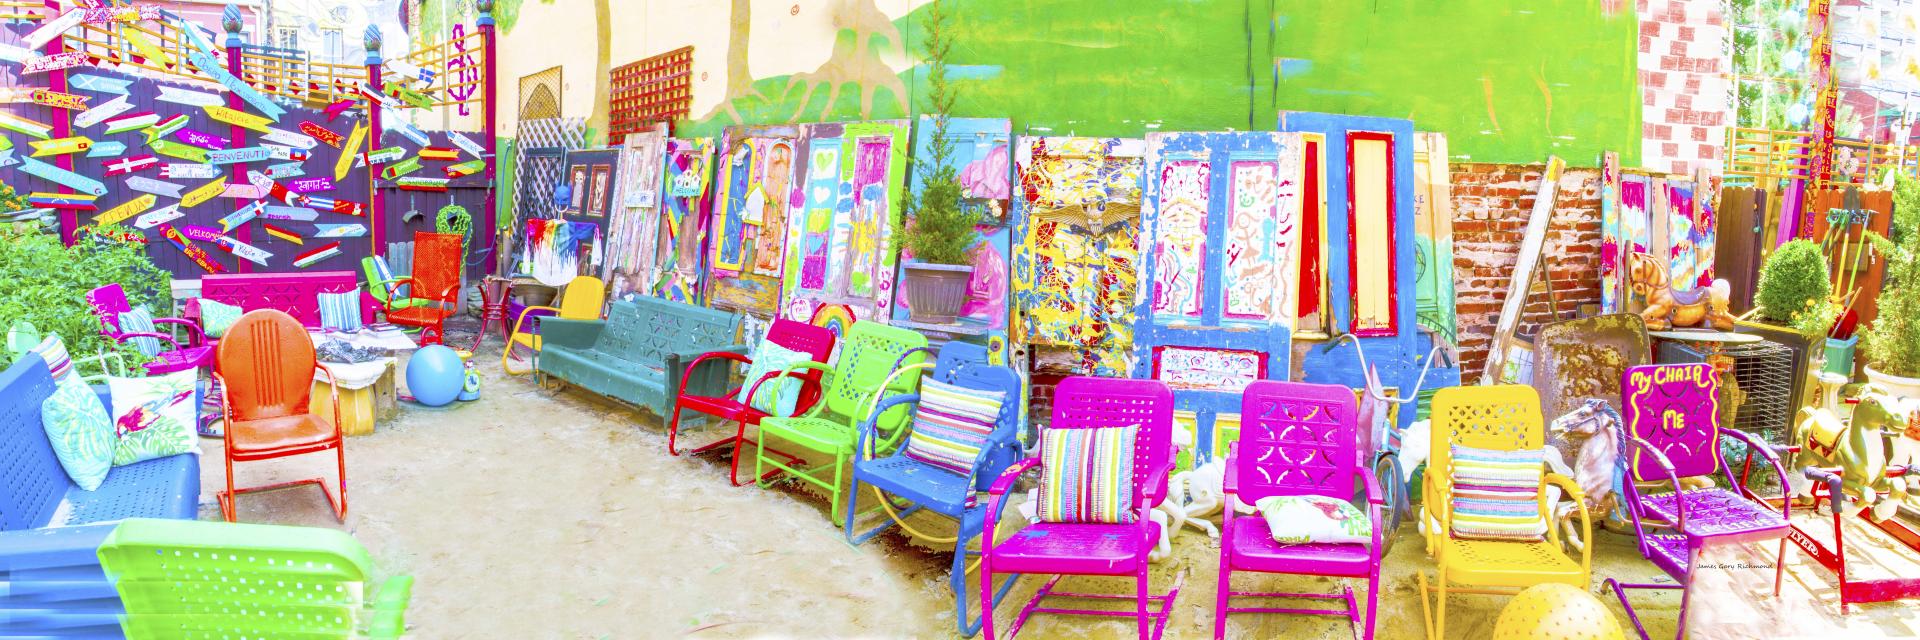 53146p architecture, randyland, chairs, color,, .jpg